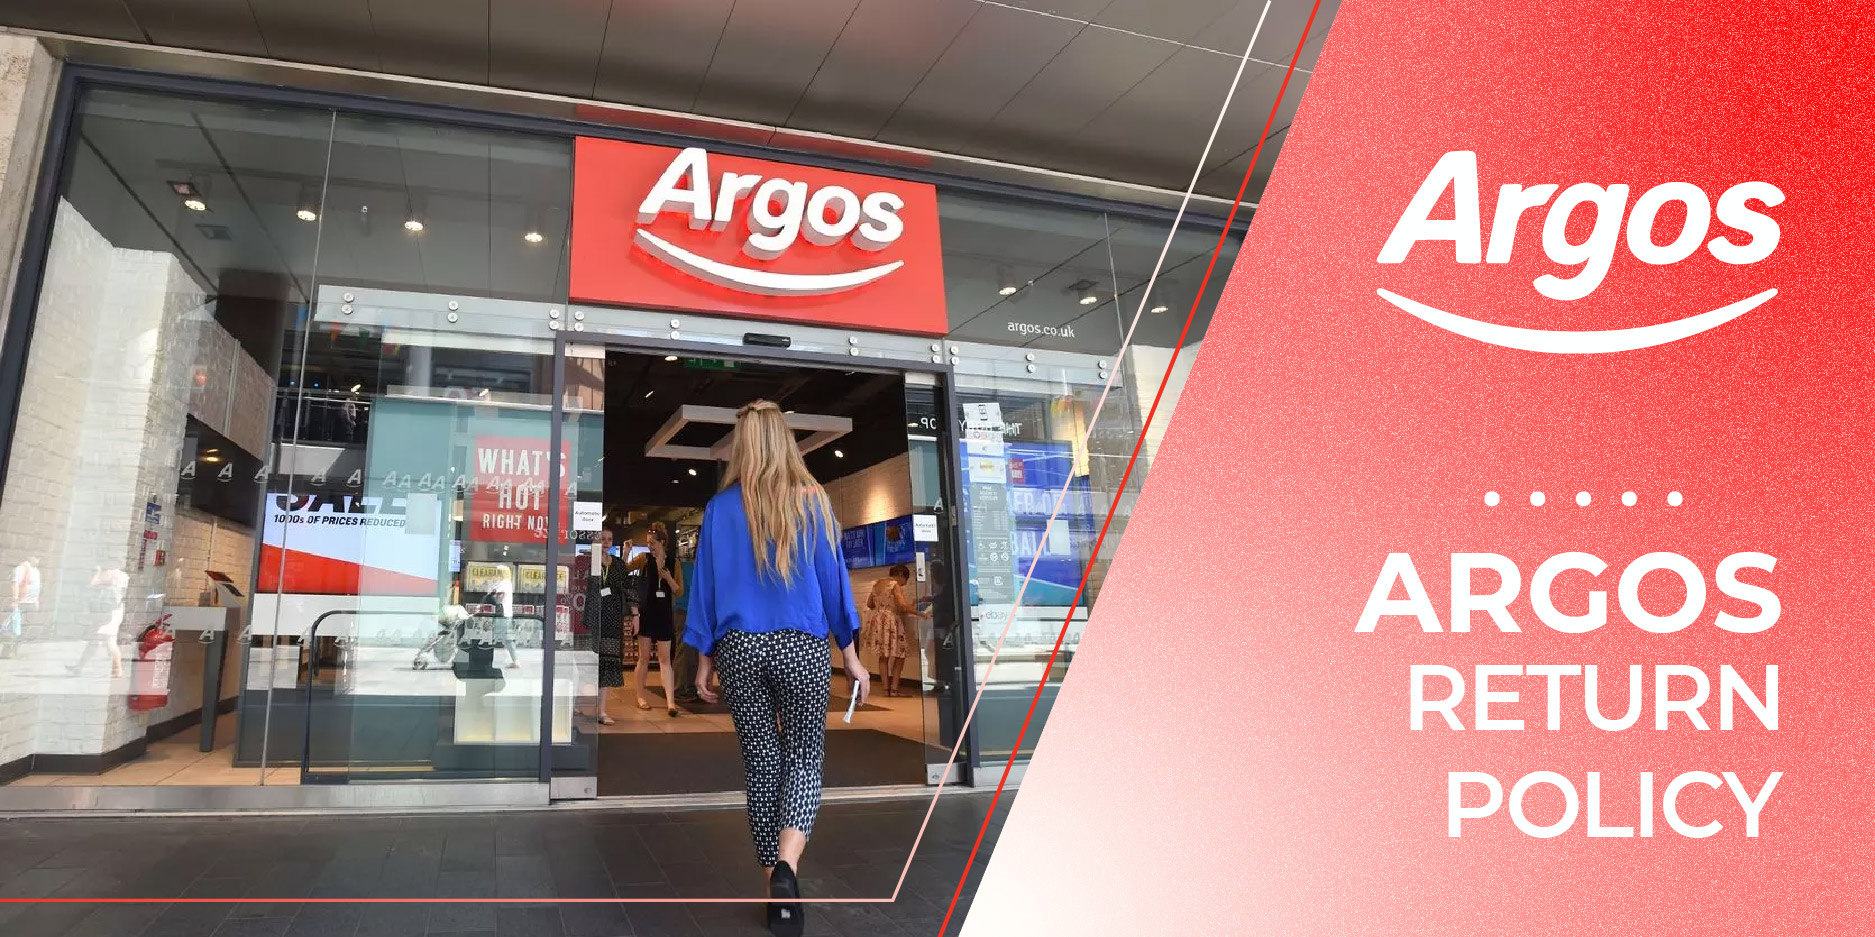 Argos Return Policy Explained For Every Customer